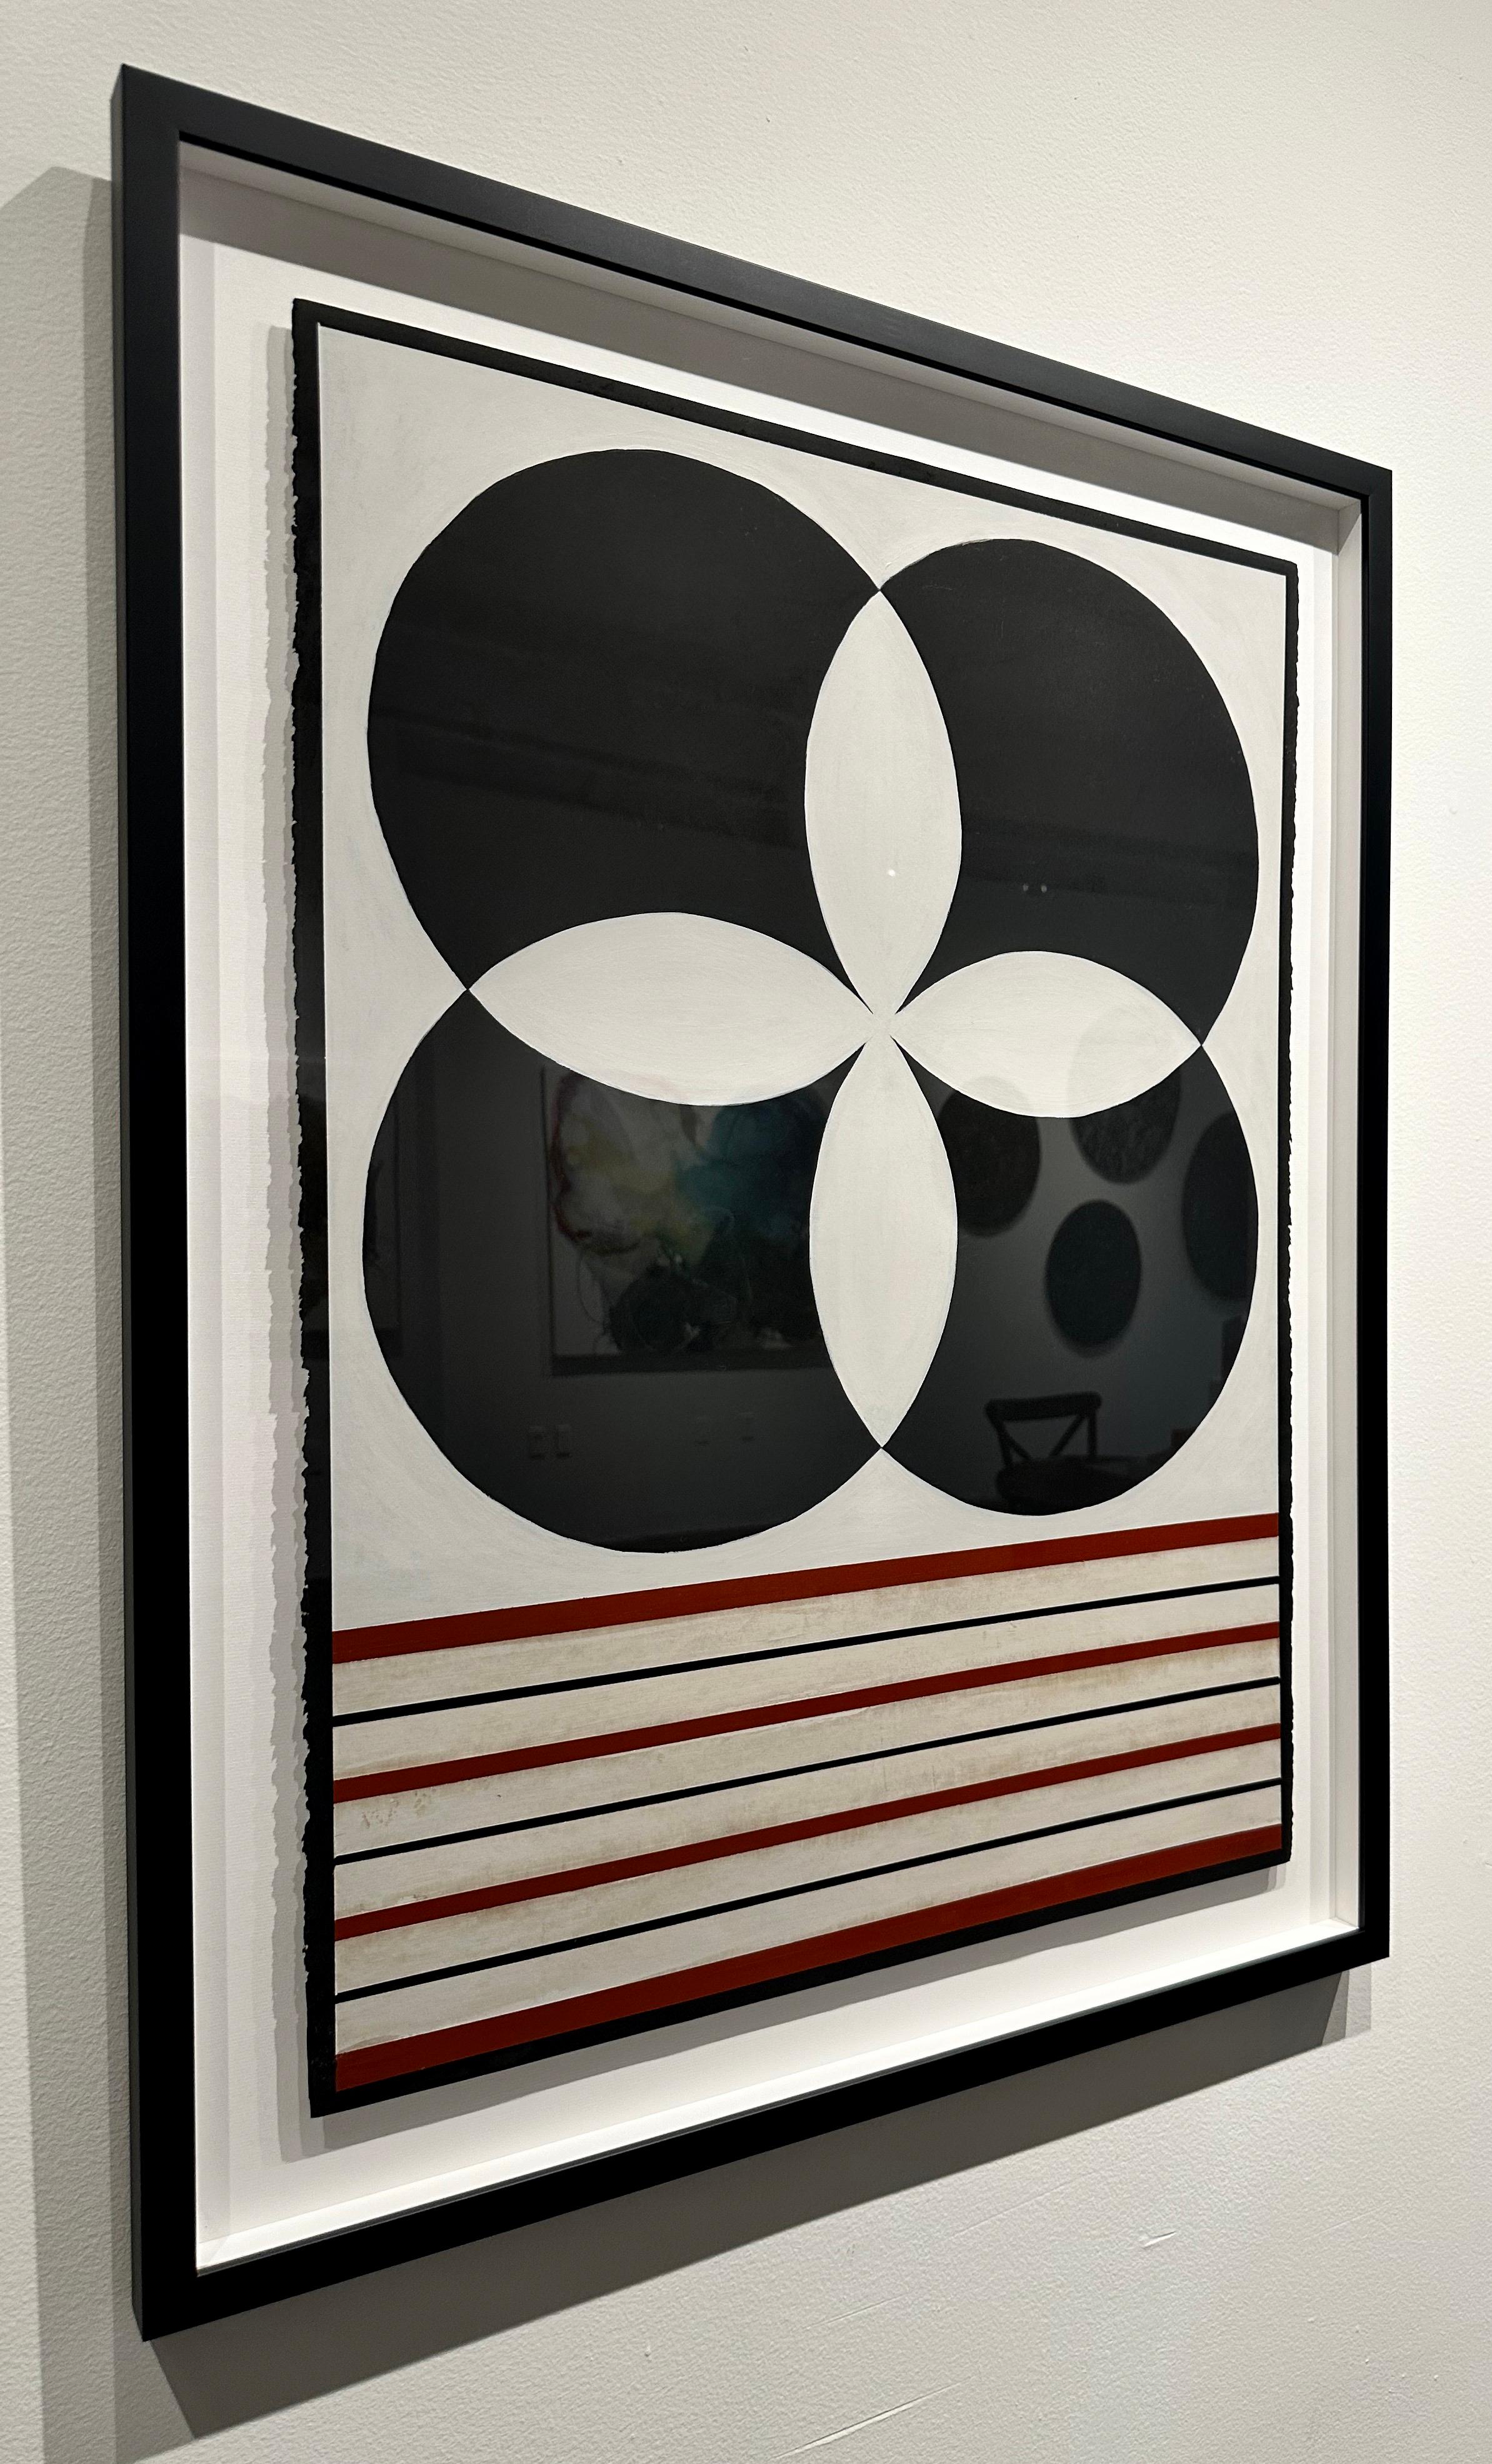 Clover, Black and neutral tones, graphic contemporary work on paper, black frame - Abstract Painting by Kazaan Viveiros